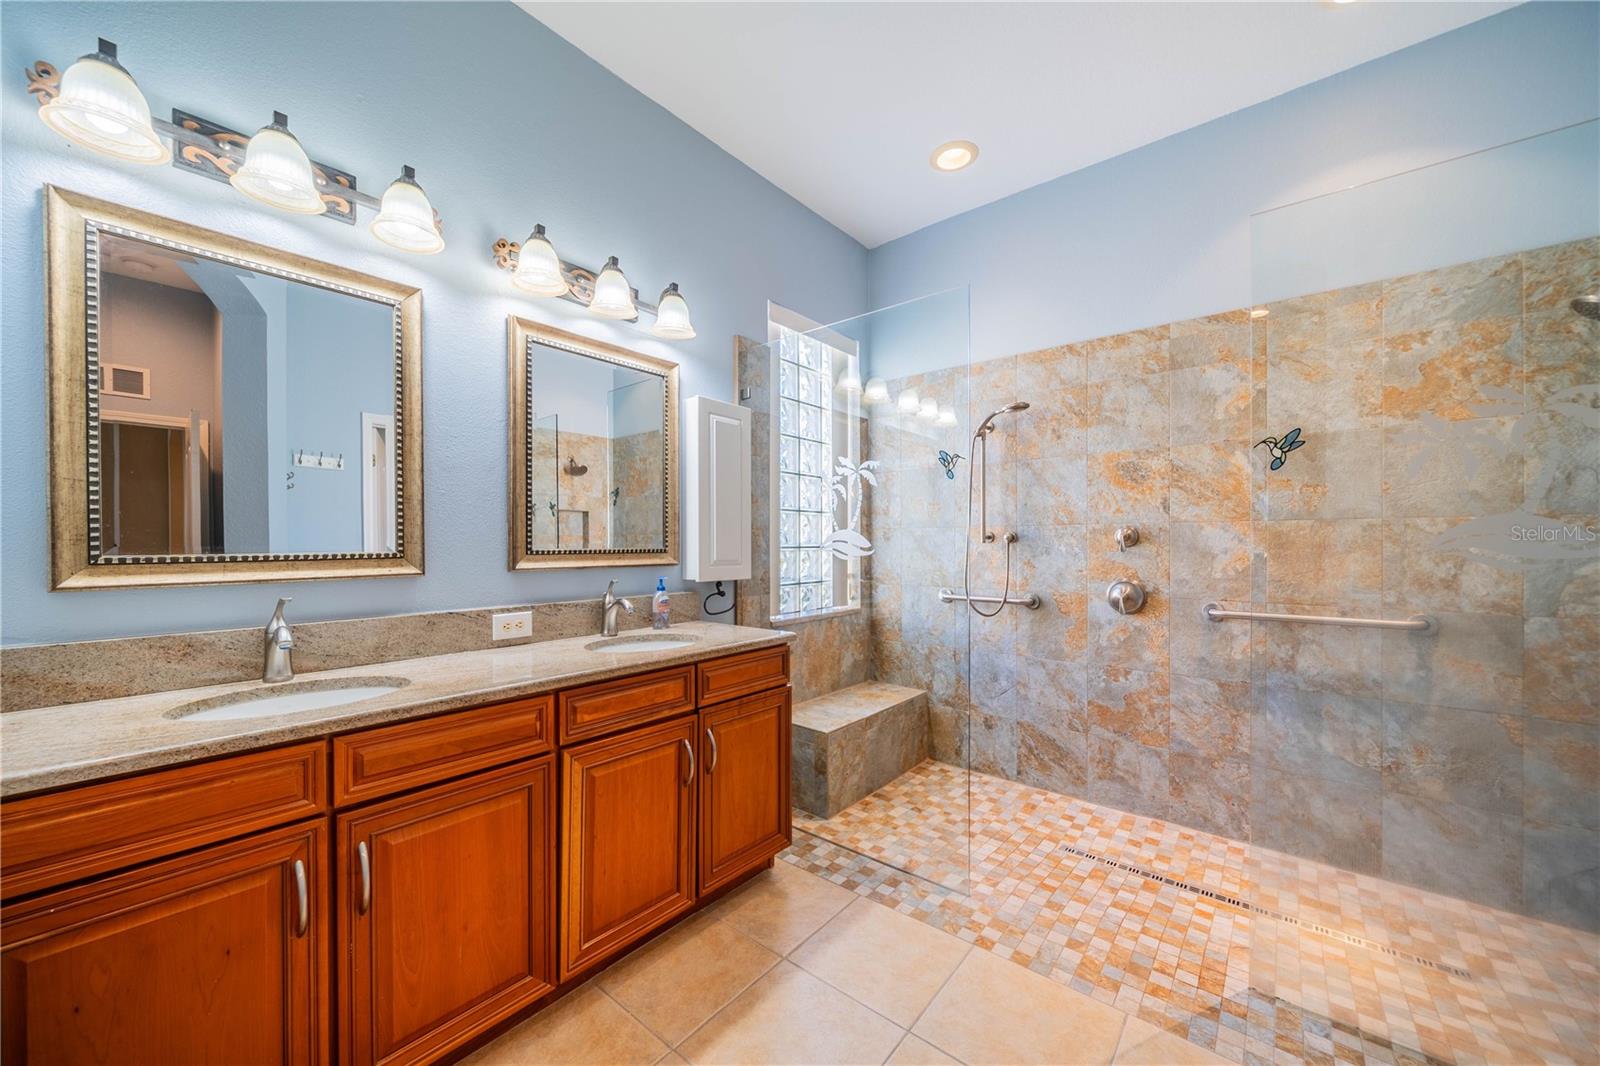 Master bath with shower